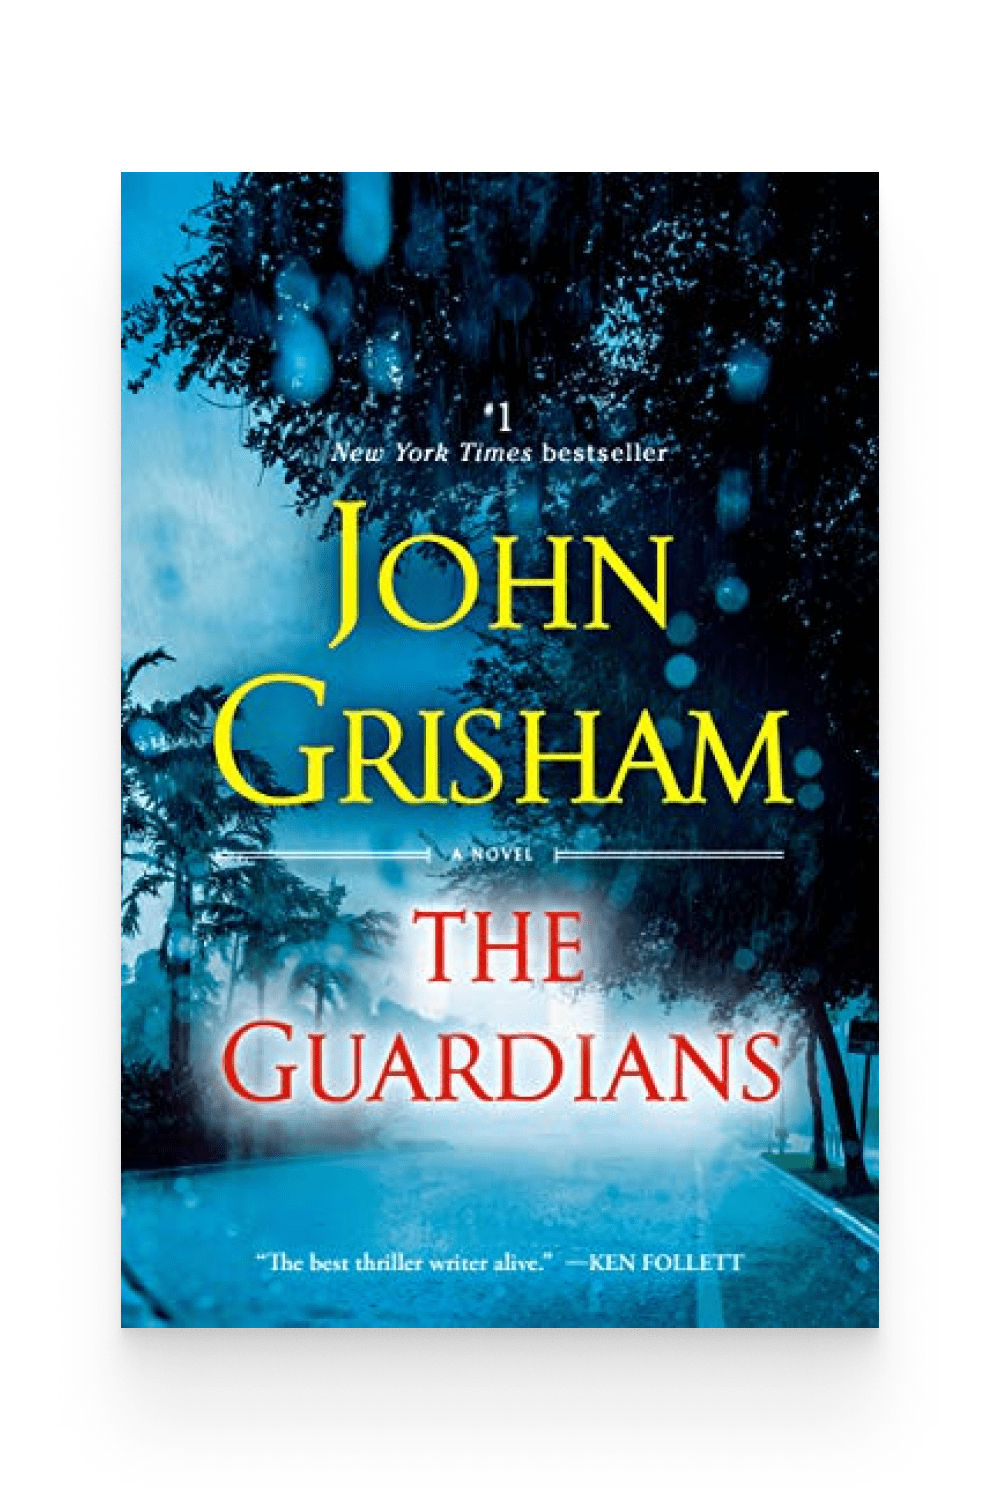 Cover of the book The Guardians by John Grisham.